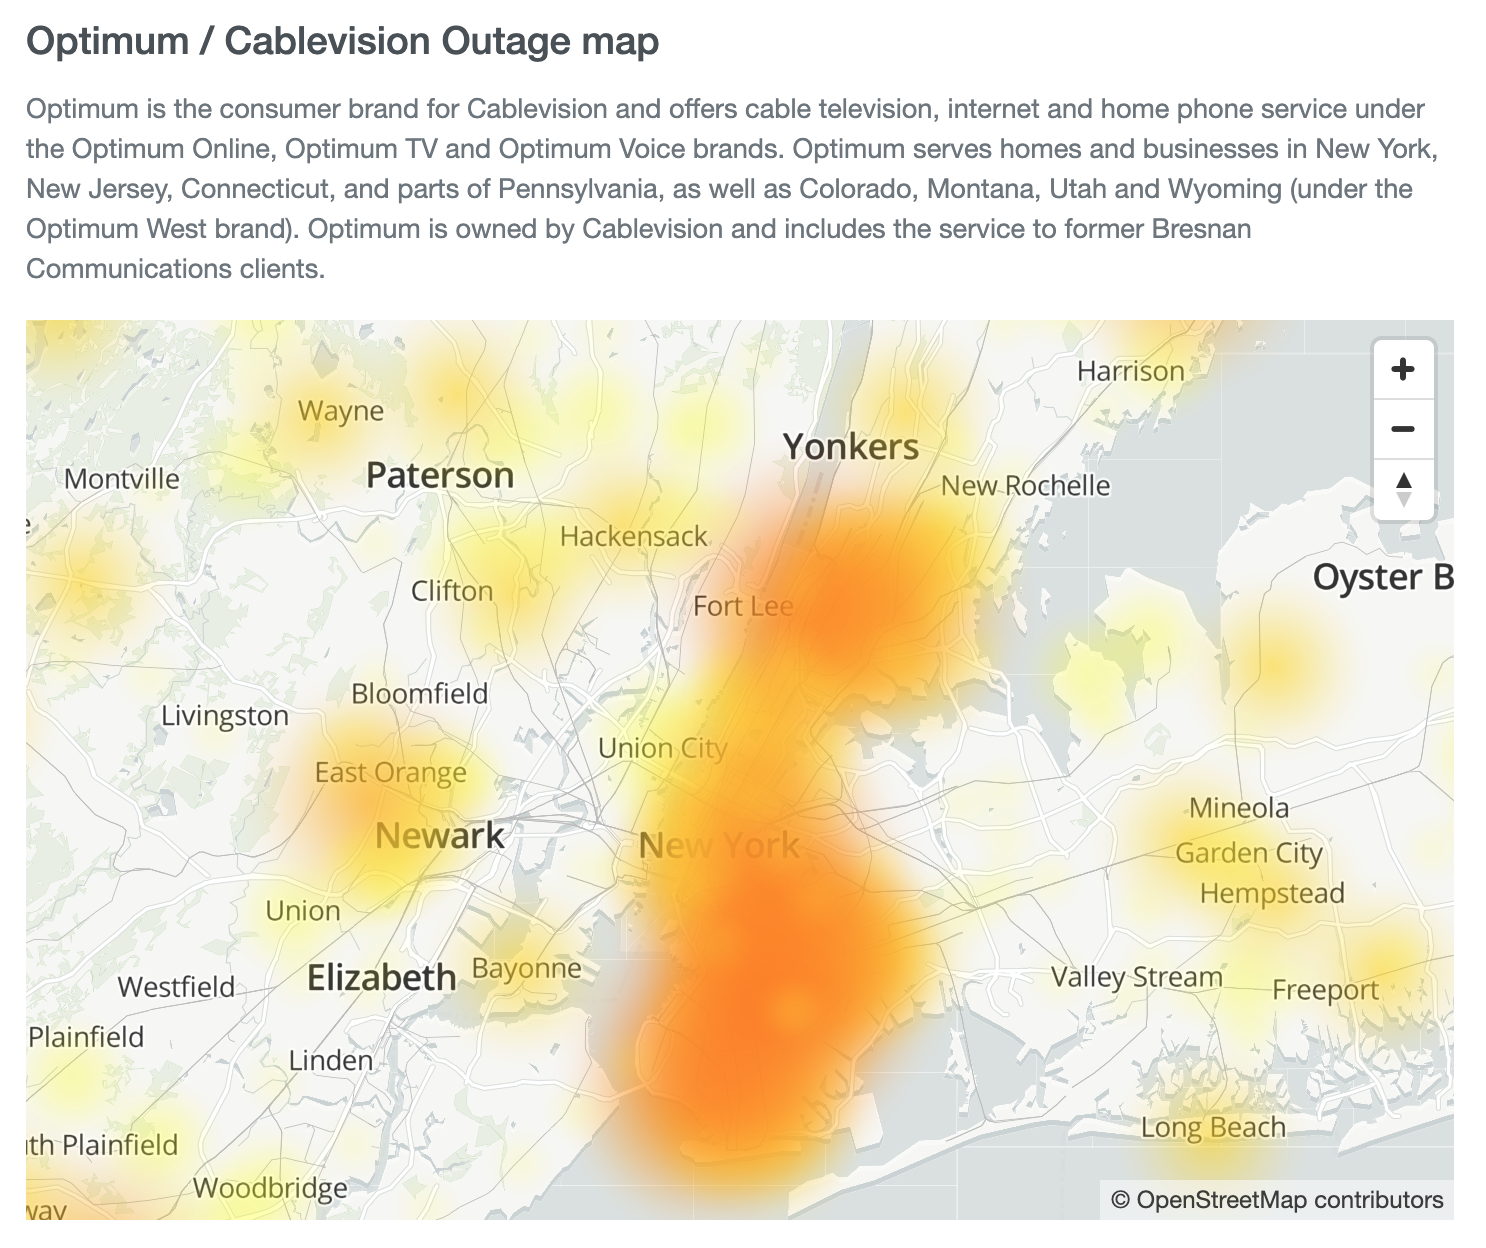 Optimum outage map